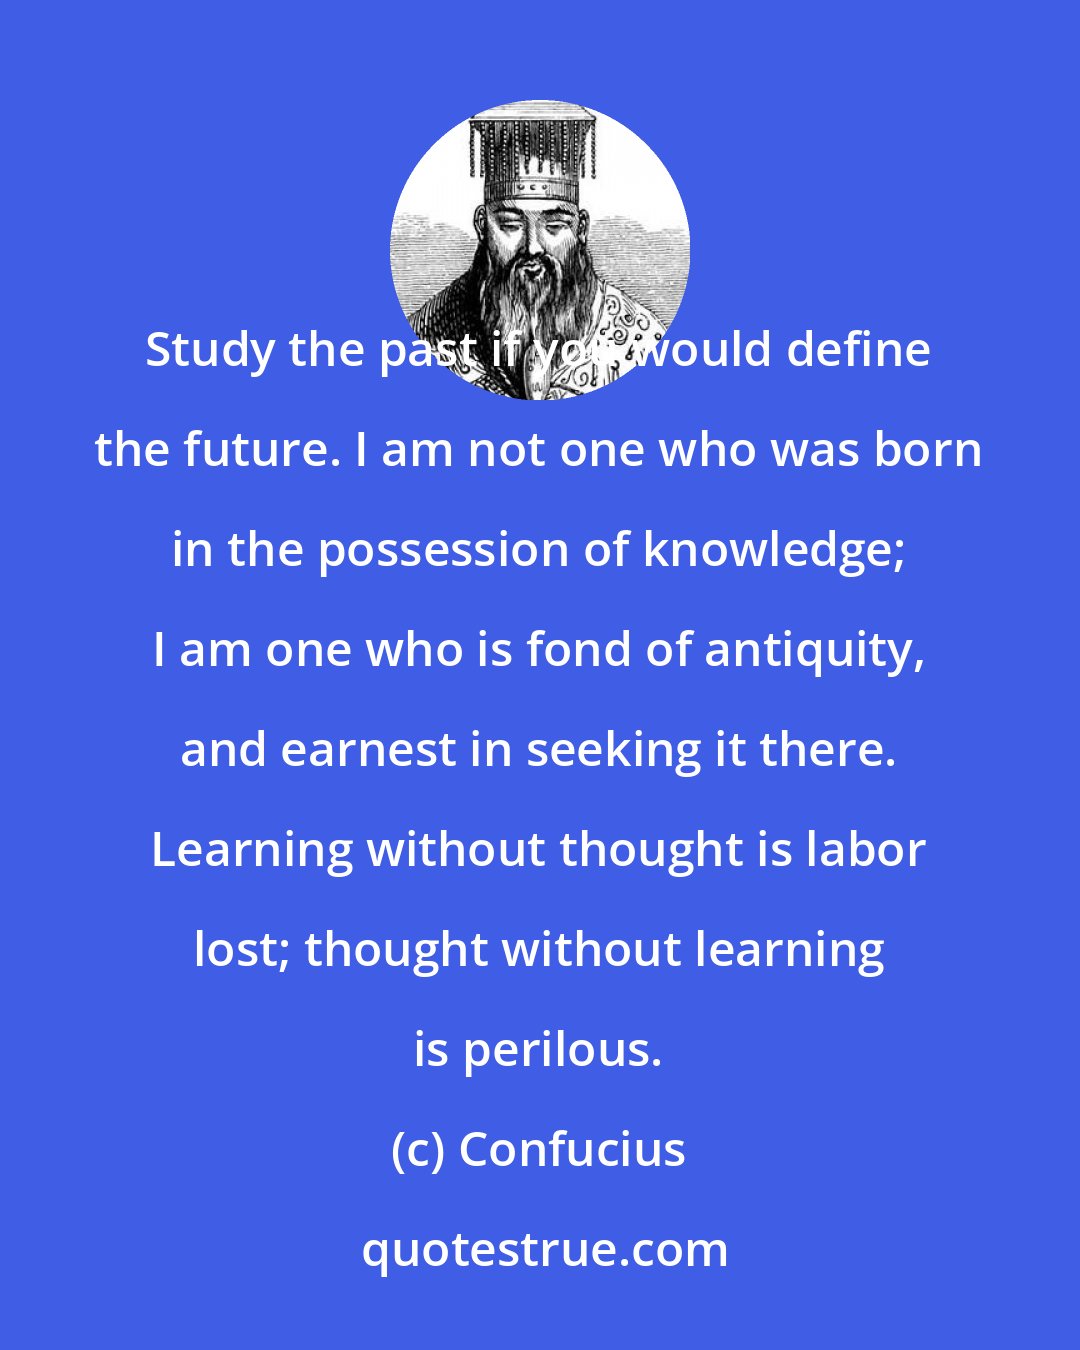 Confucius: Study the past if you would define the future. I am not one who was born in the possession of knowledge; I am one who is fond of antiquity, and earnest in seeking it there. Learning without thought is labor lost; thought without learning is perilous.